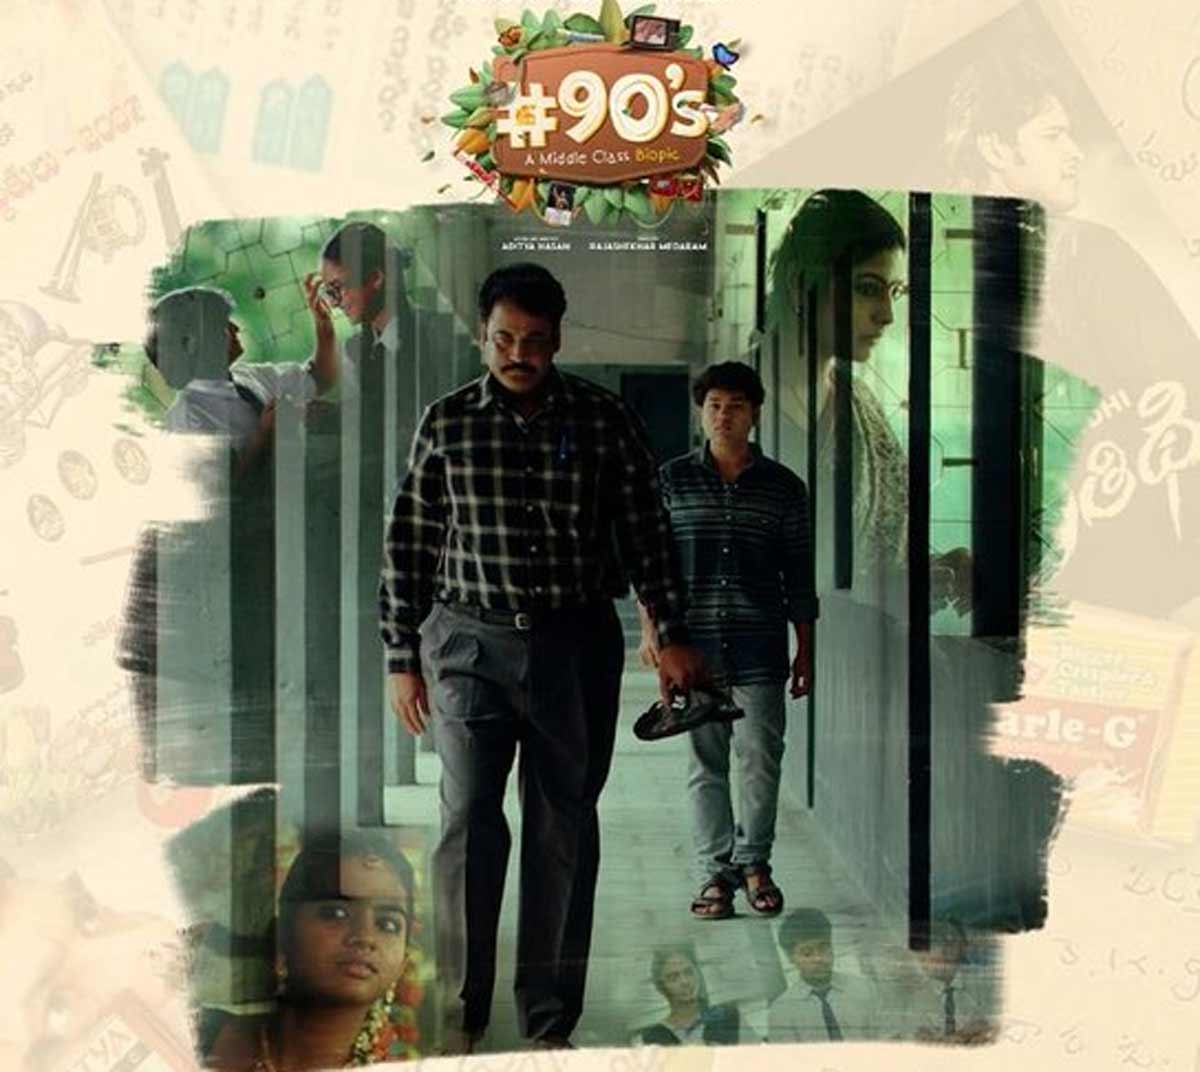 90's-A Middle Class Biopic